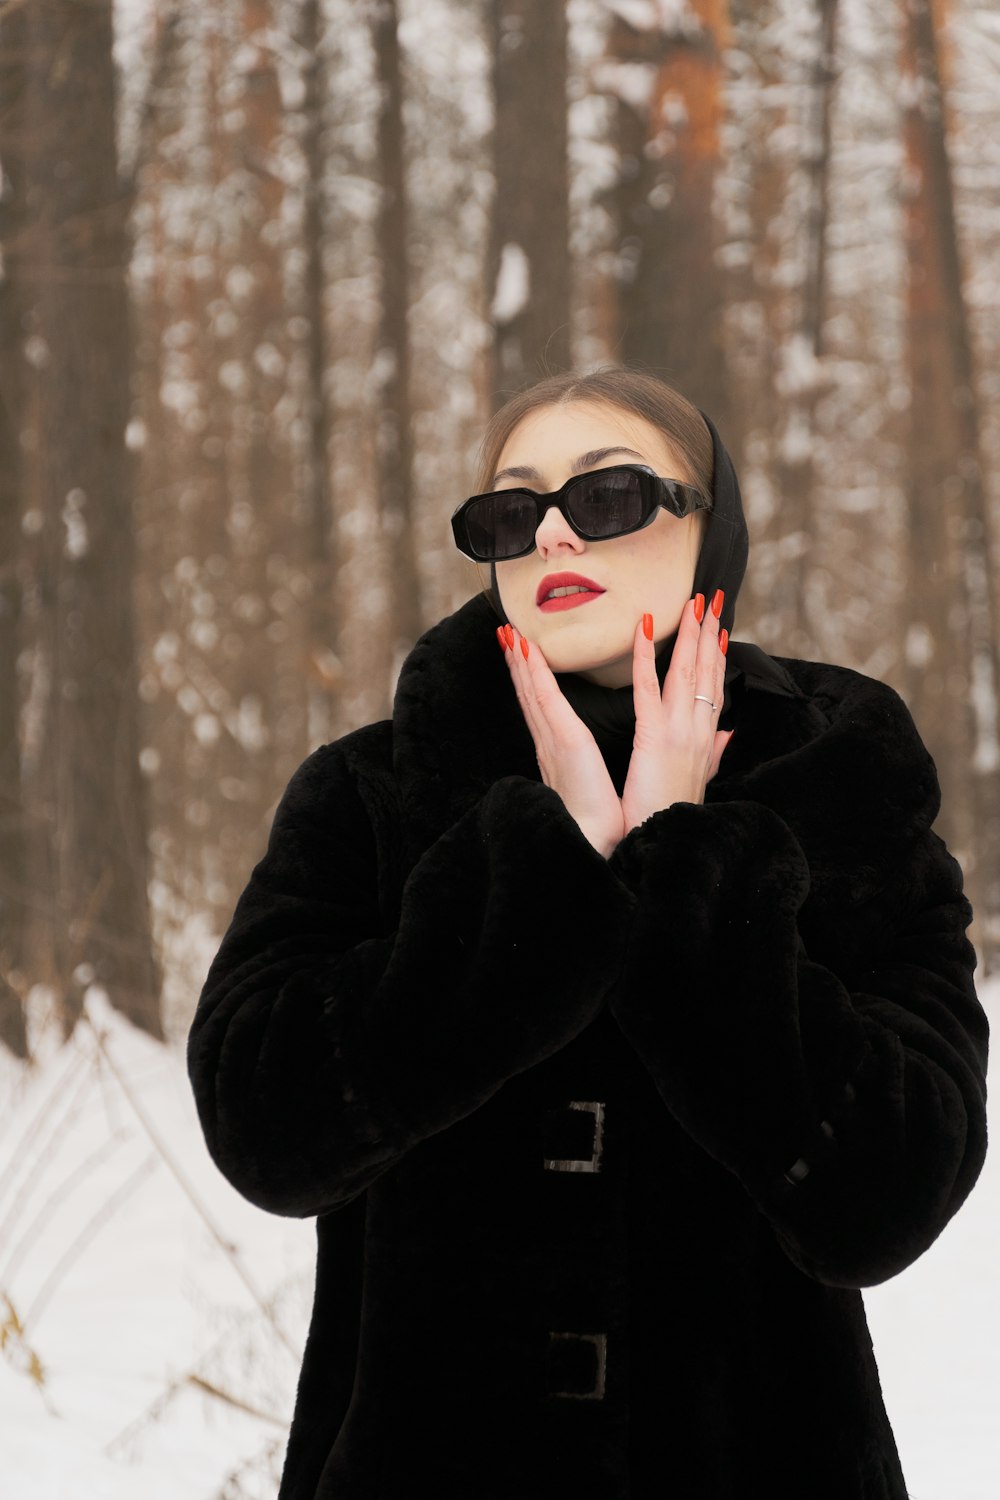 a woman in a black coat and sunglasses standing in the snow